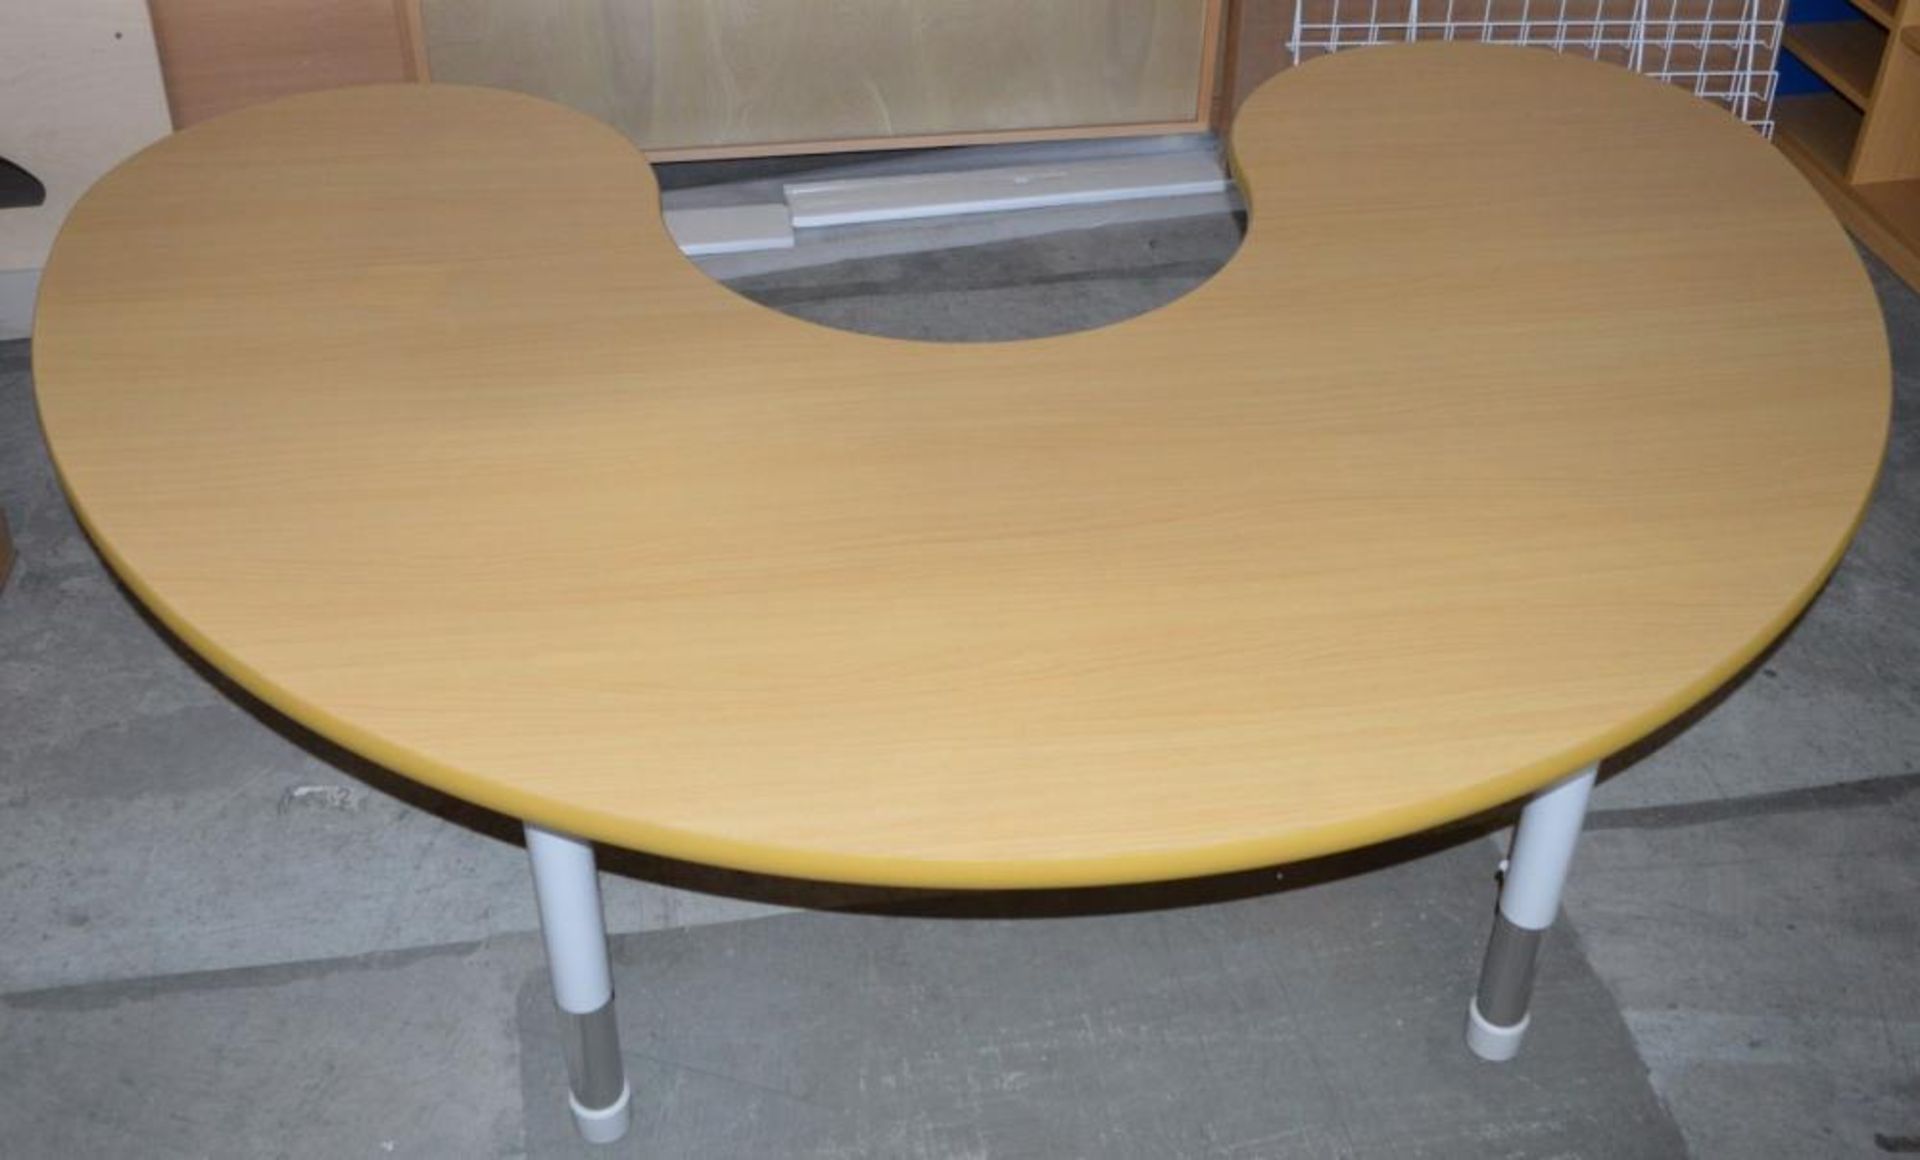 1 x Educational Milan 1800 x 1200mm Group Table 6 Seater with Adjustable Legs - New/Flat-Packed - CL - Image 2 of 12